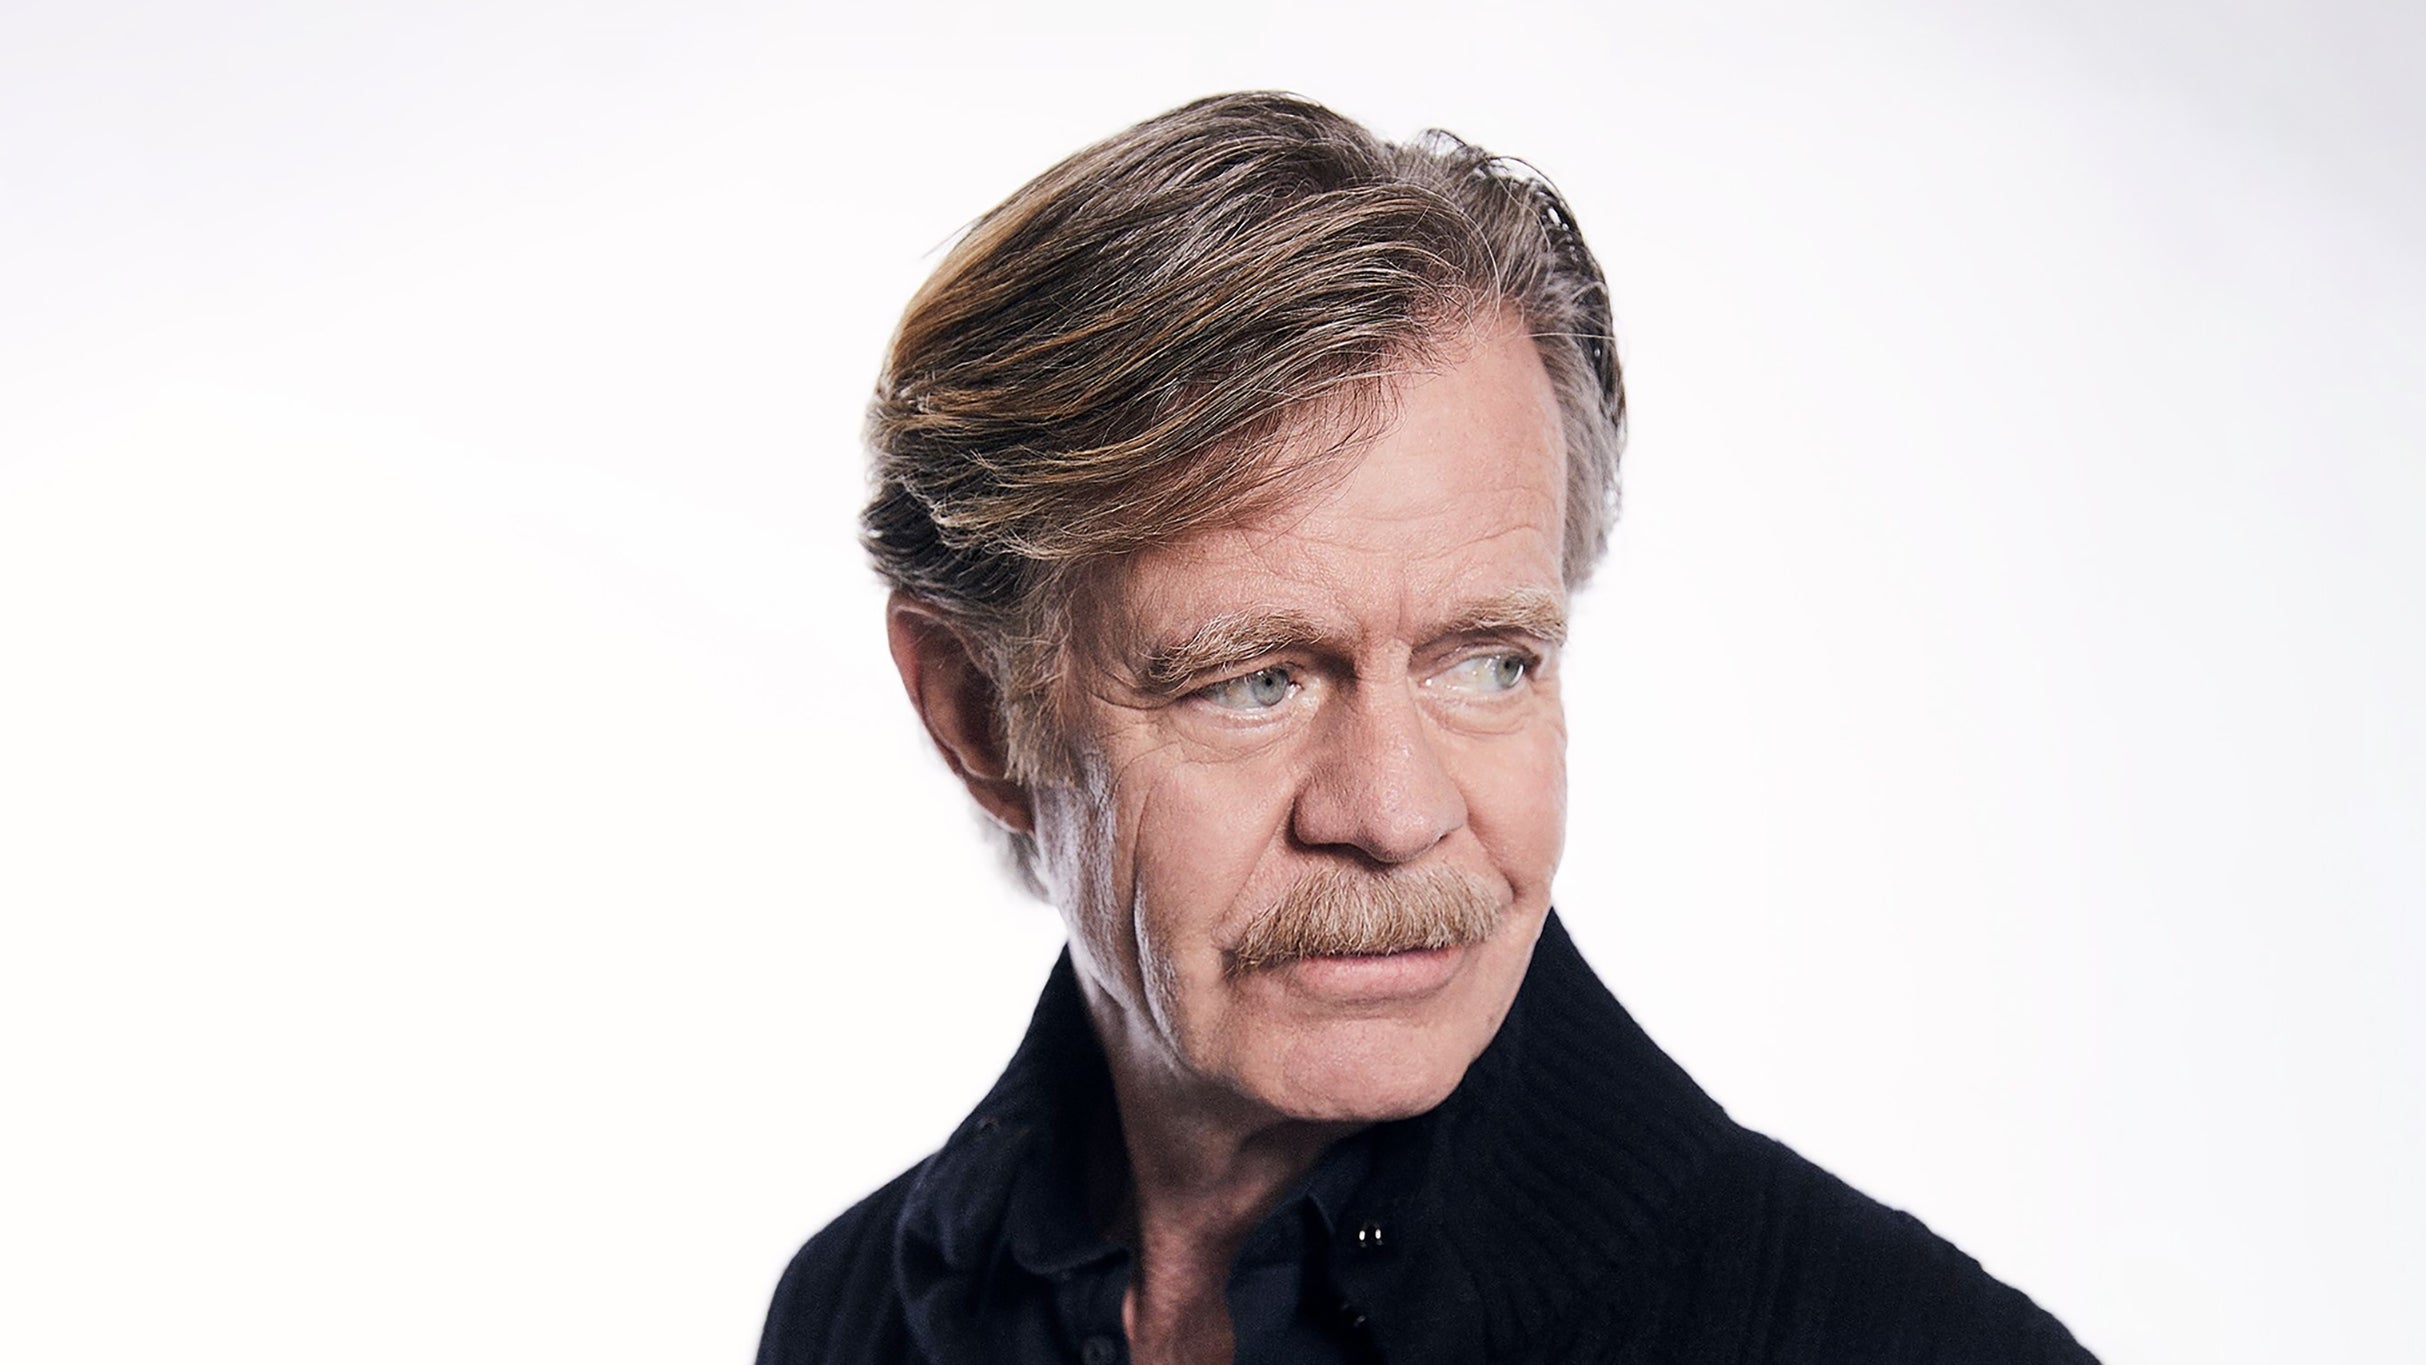 An Evening with William H. Macy and Screening of Fargo